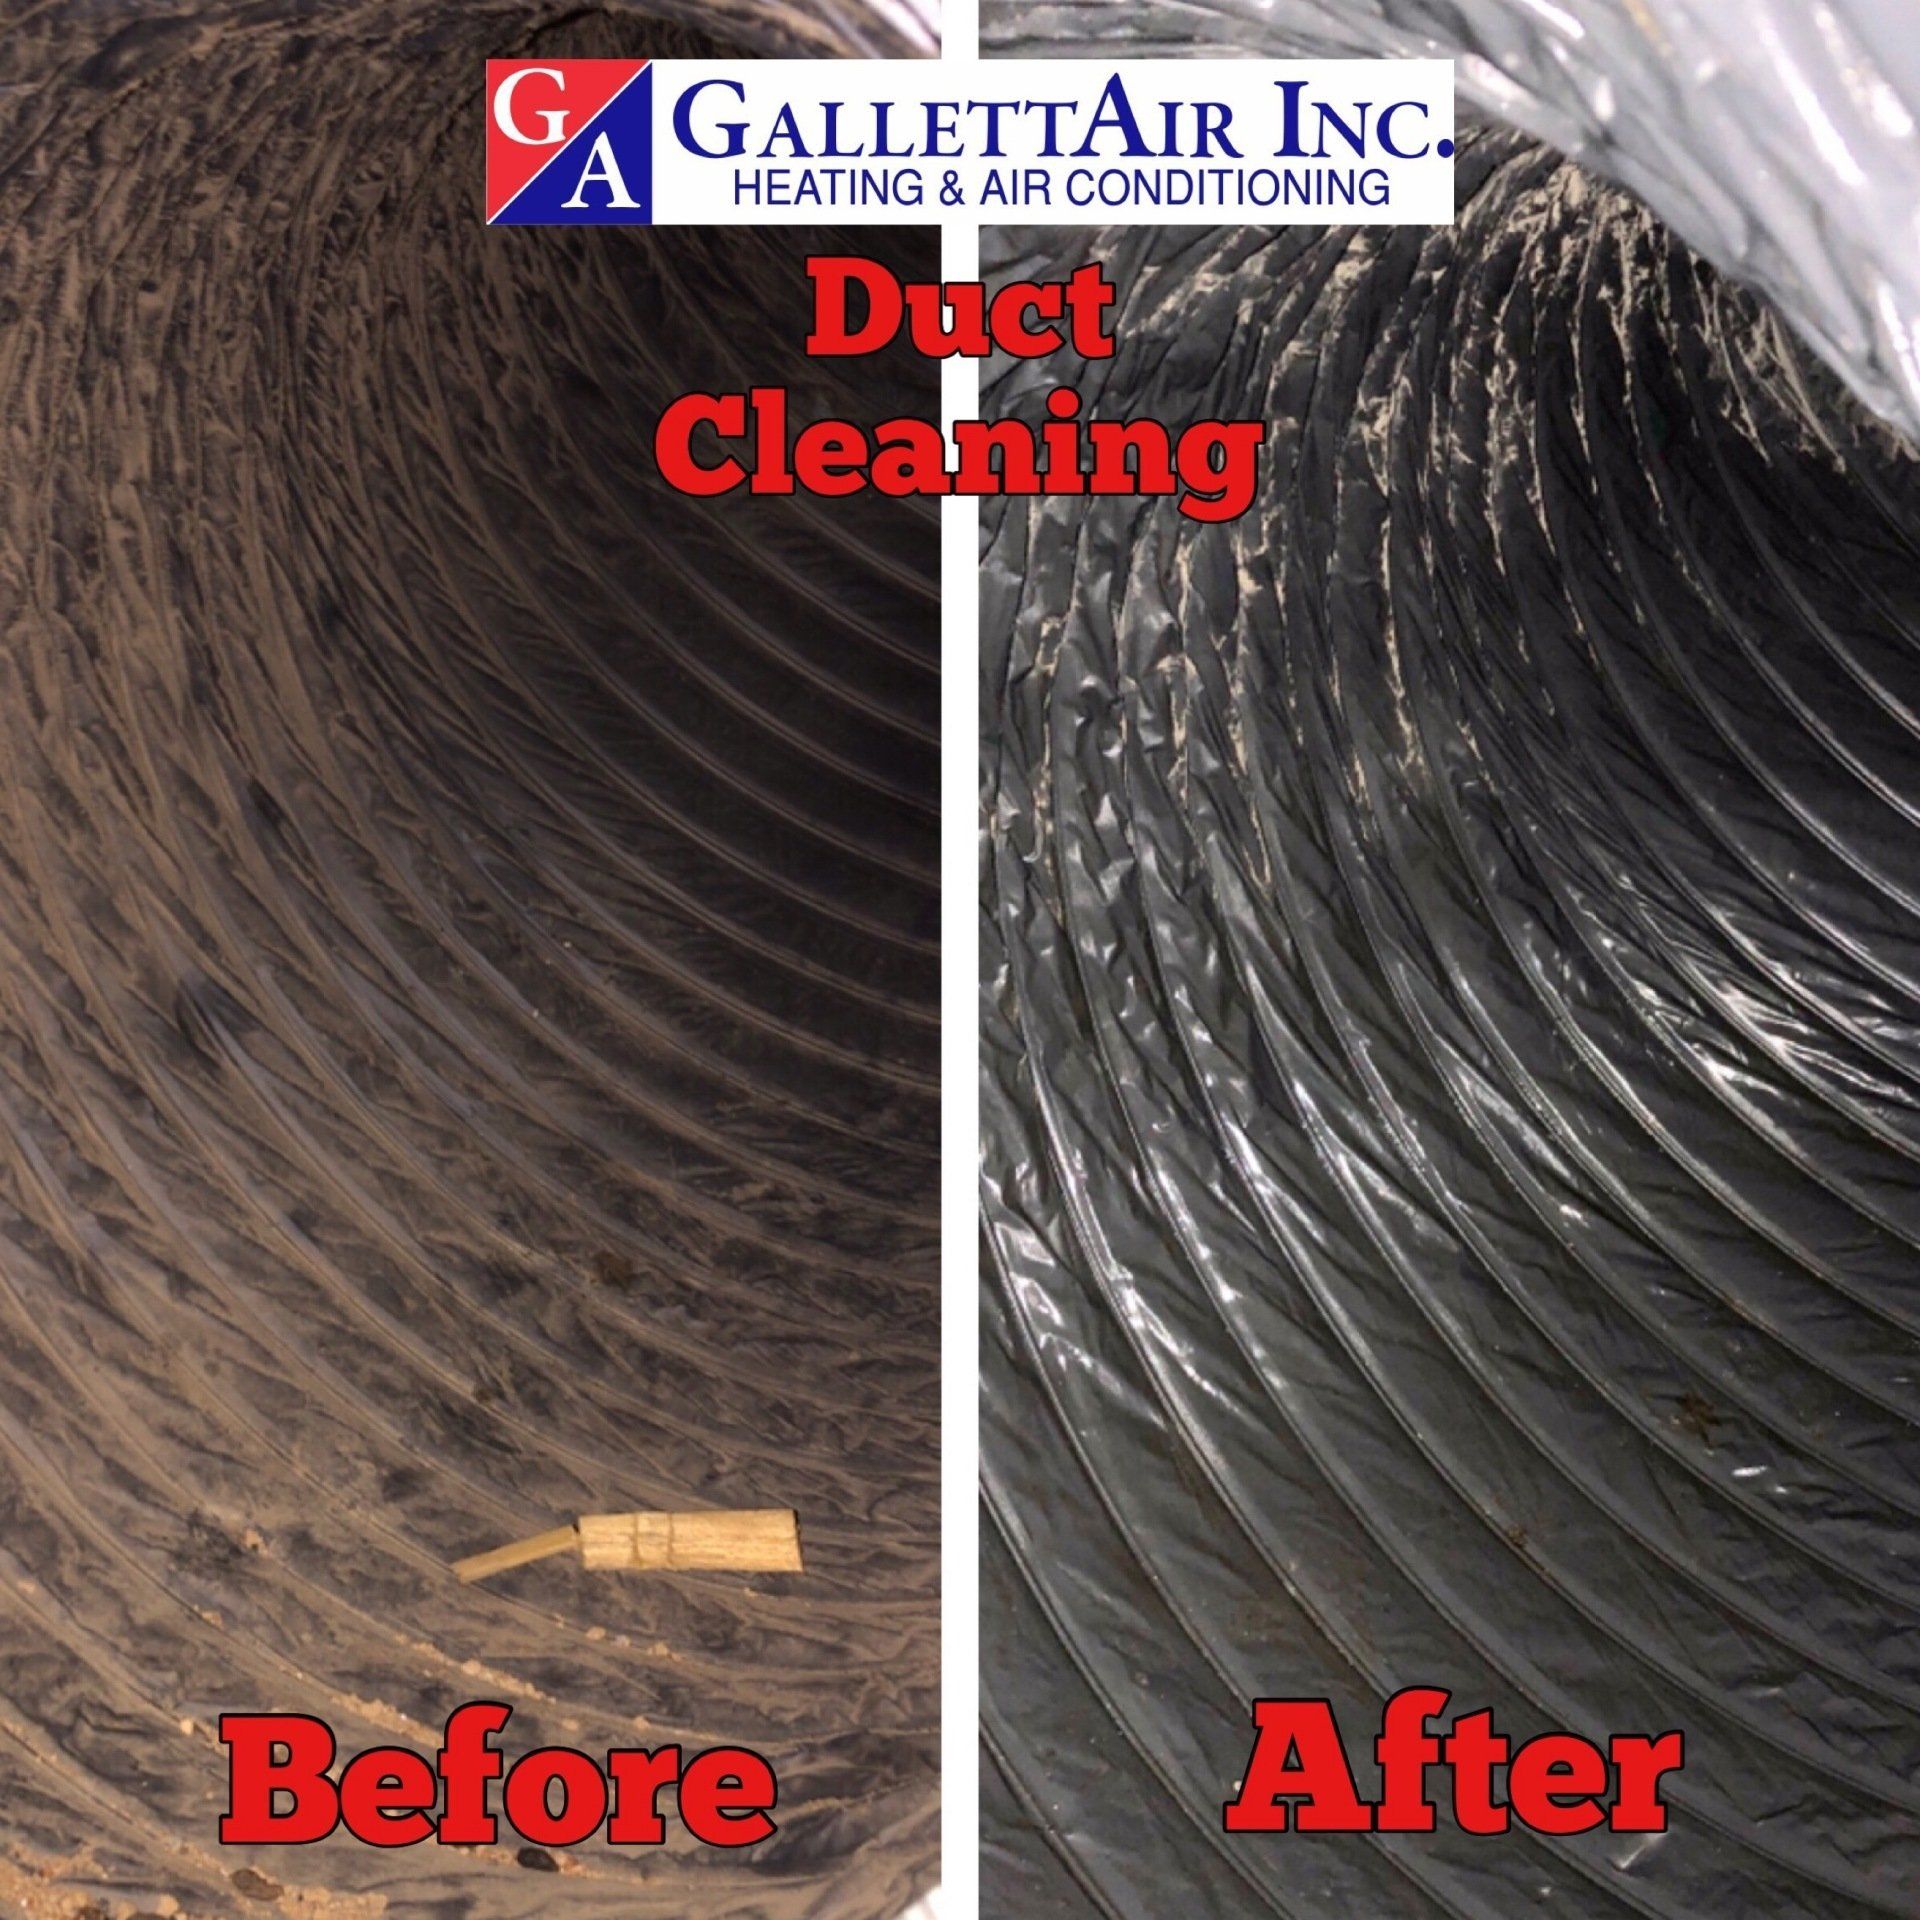 duct cleaning services - GallettAir Inc